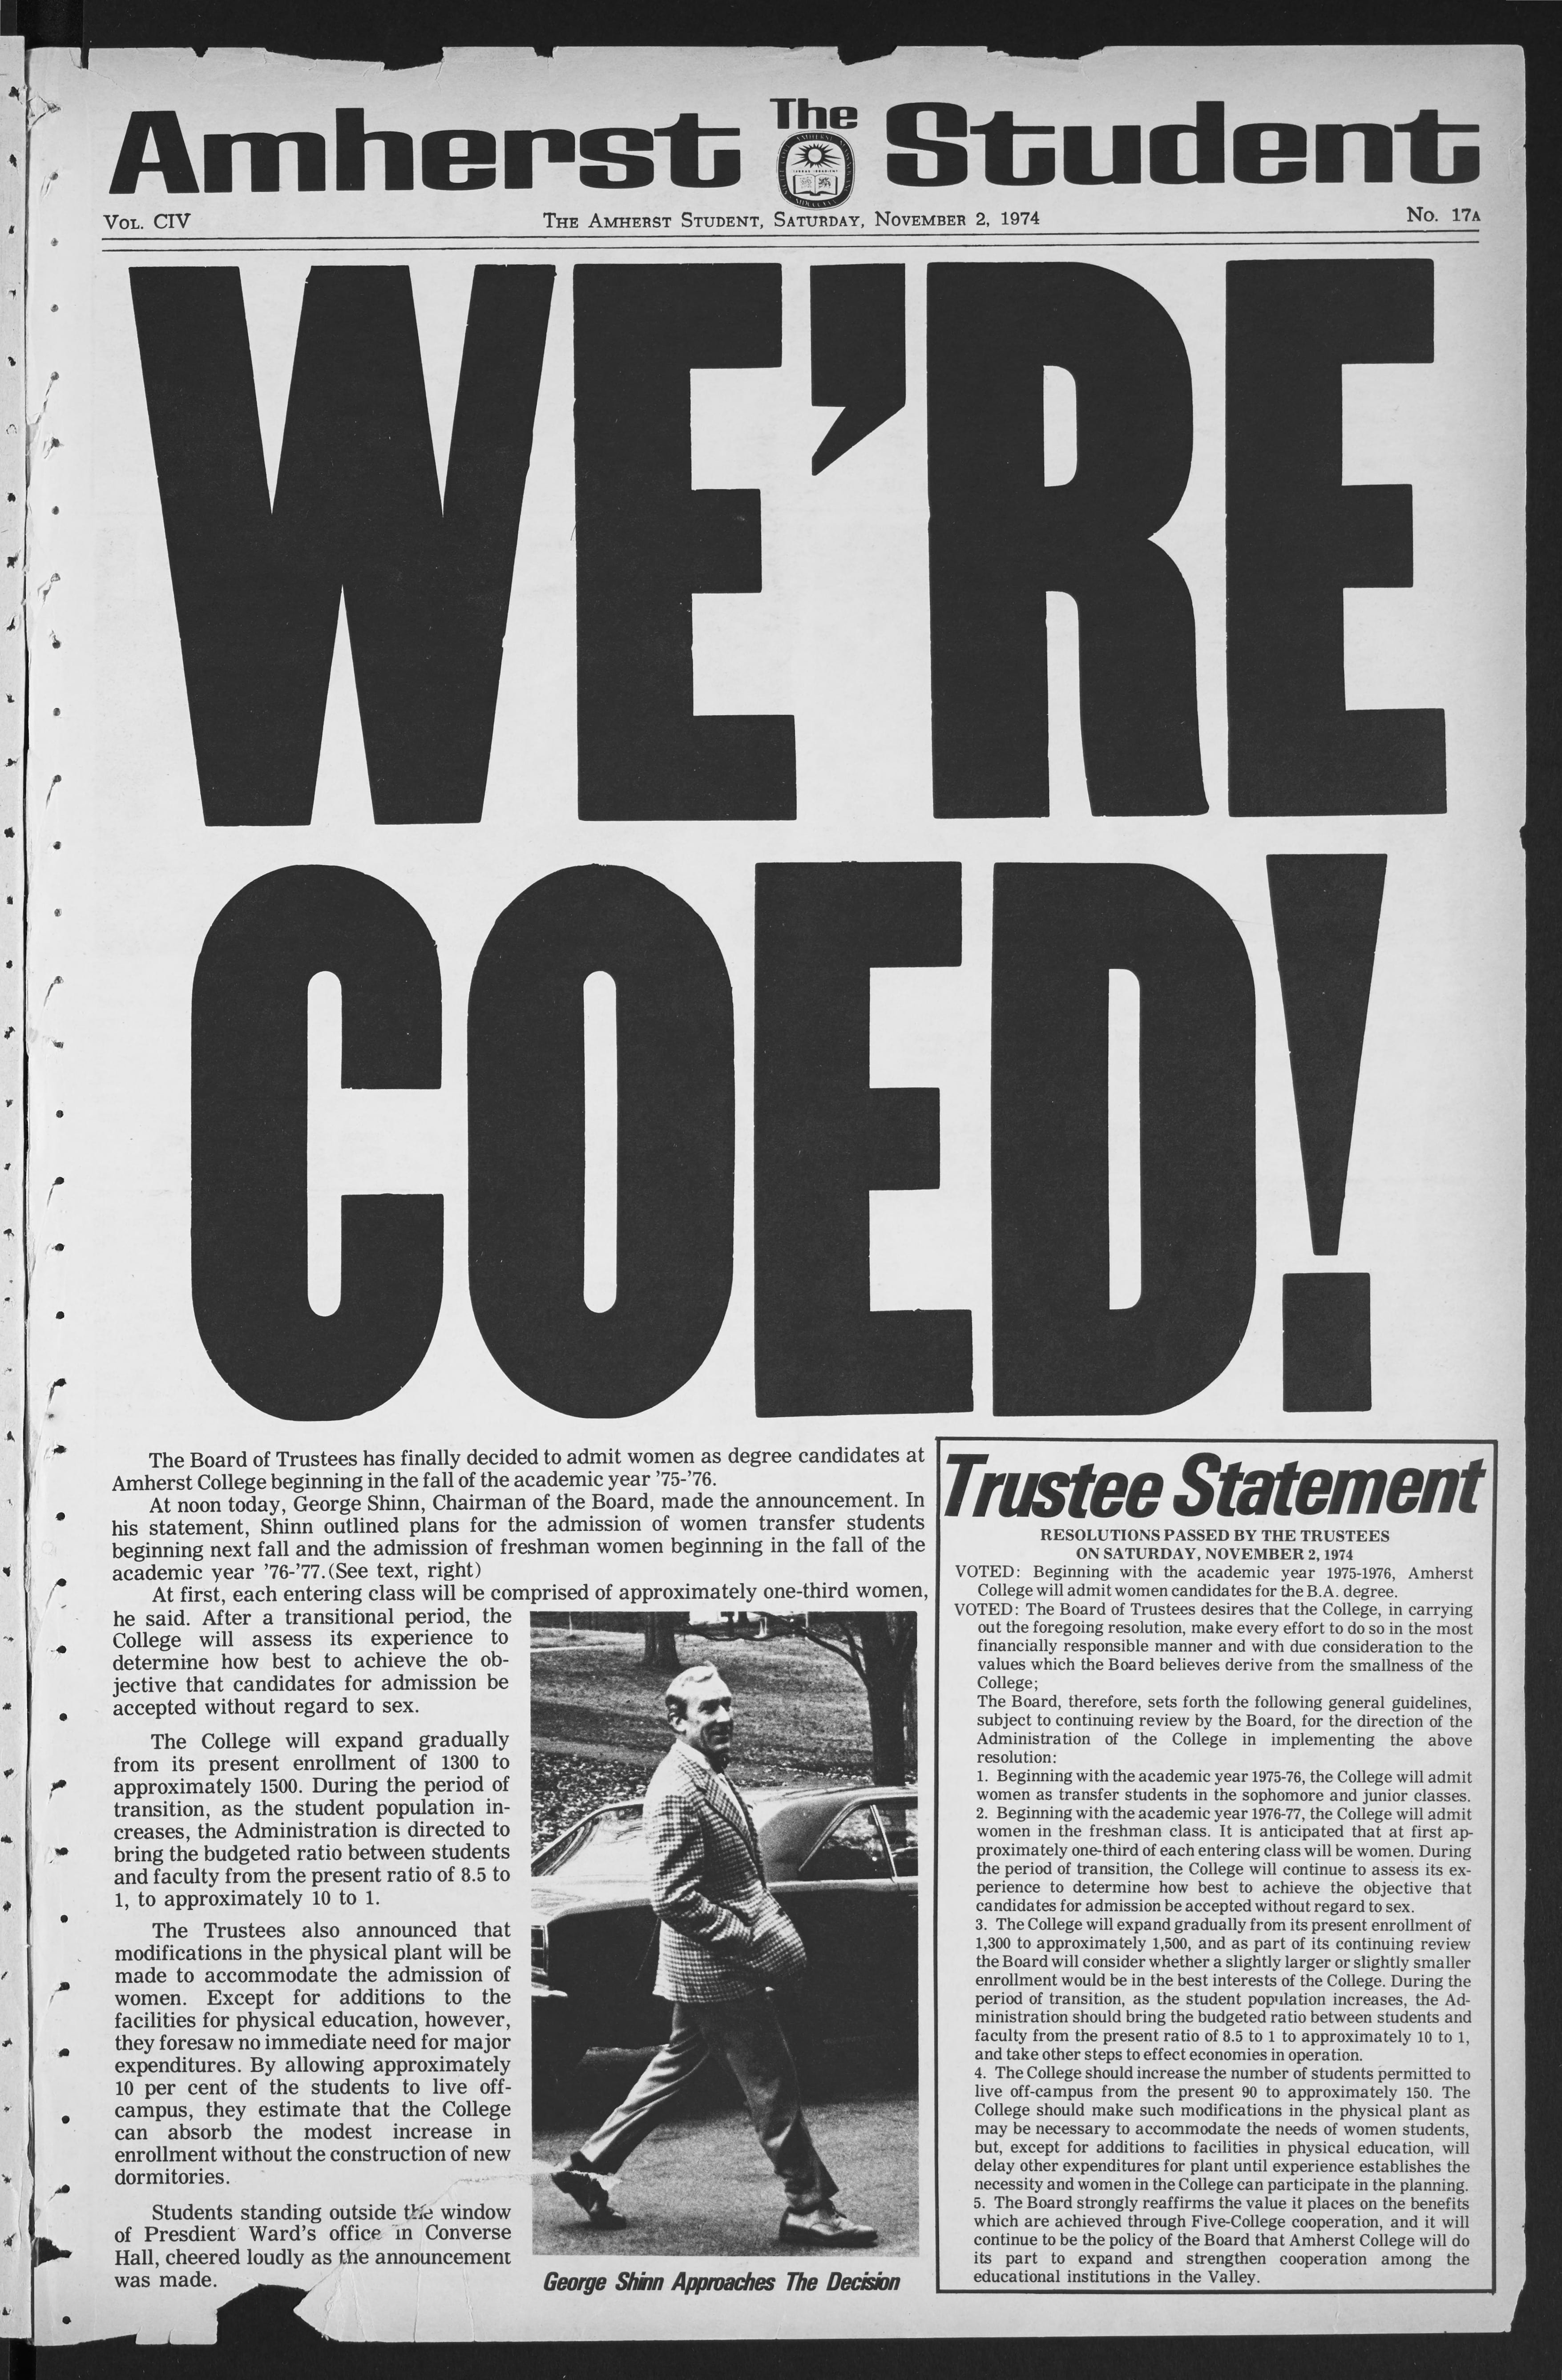 Front page of November 2 1974 Amherst Student with "We're Coed!" headline